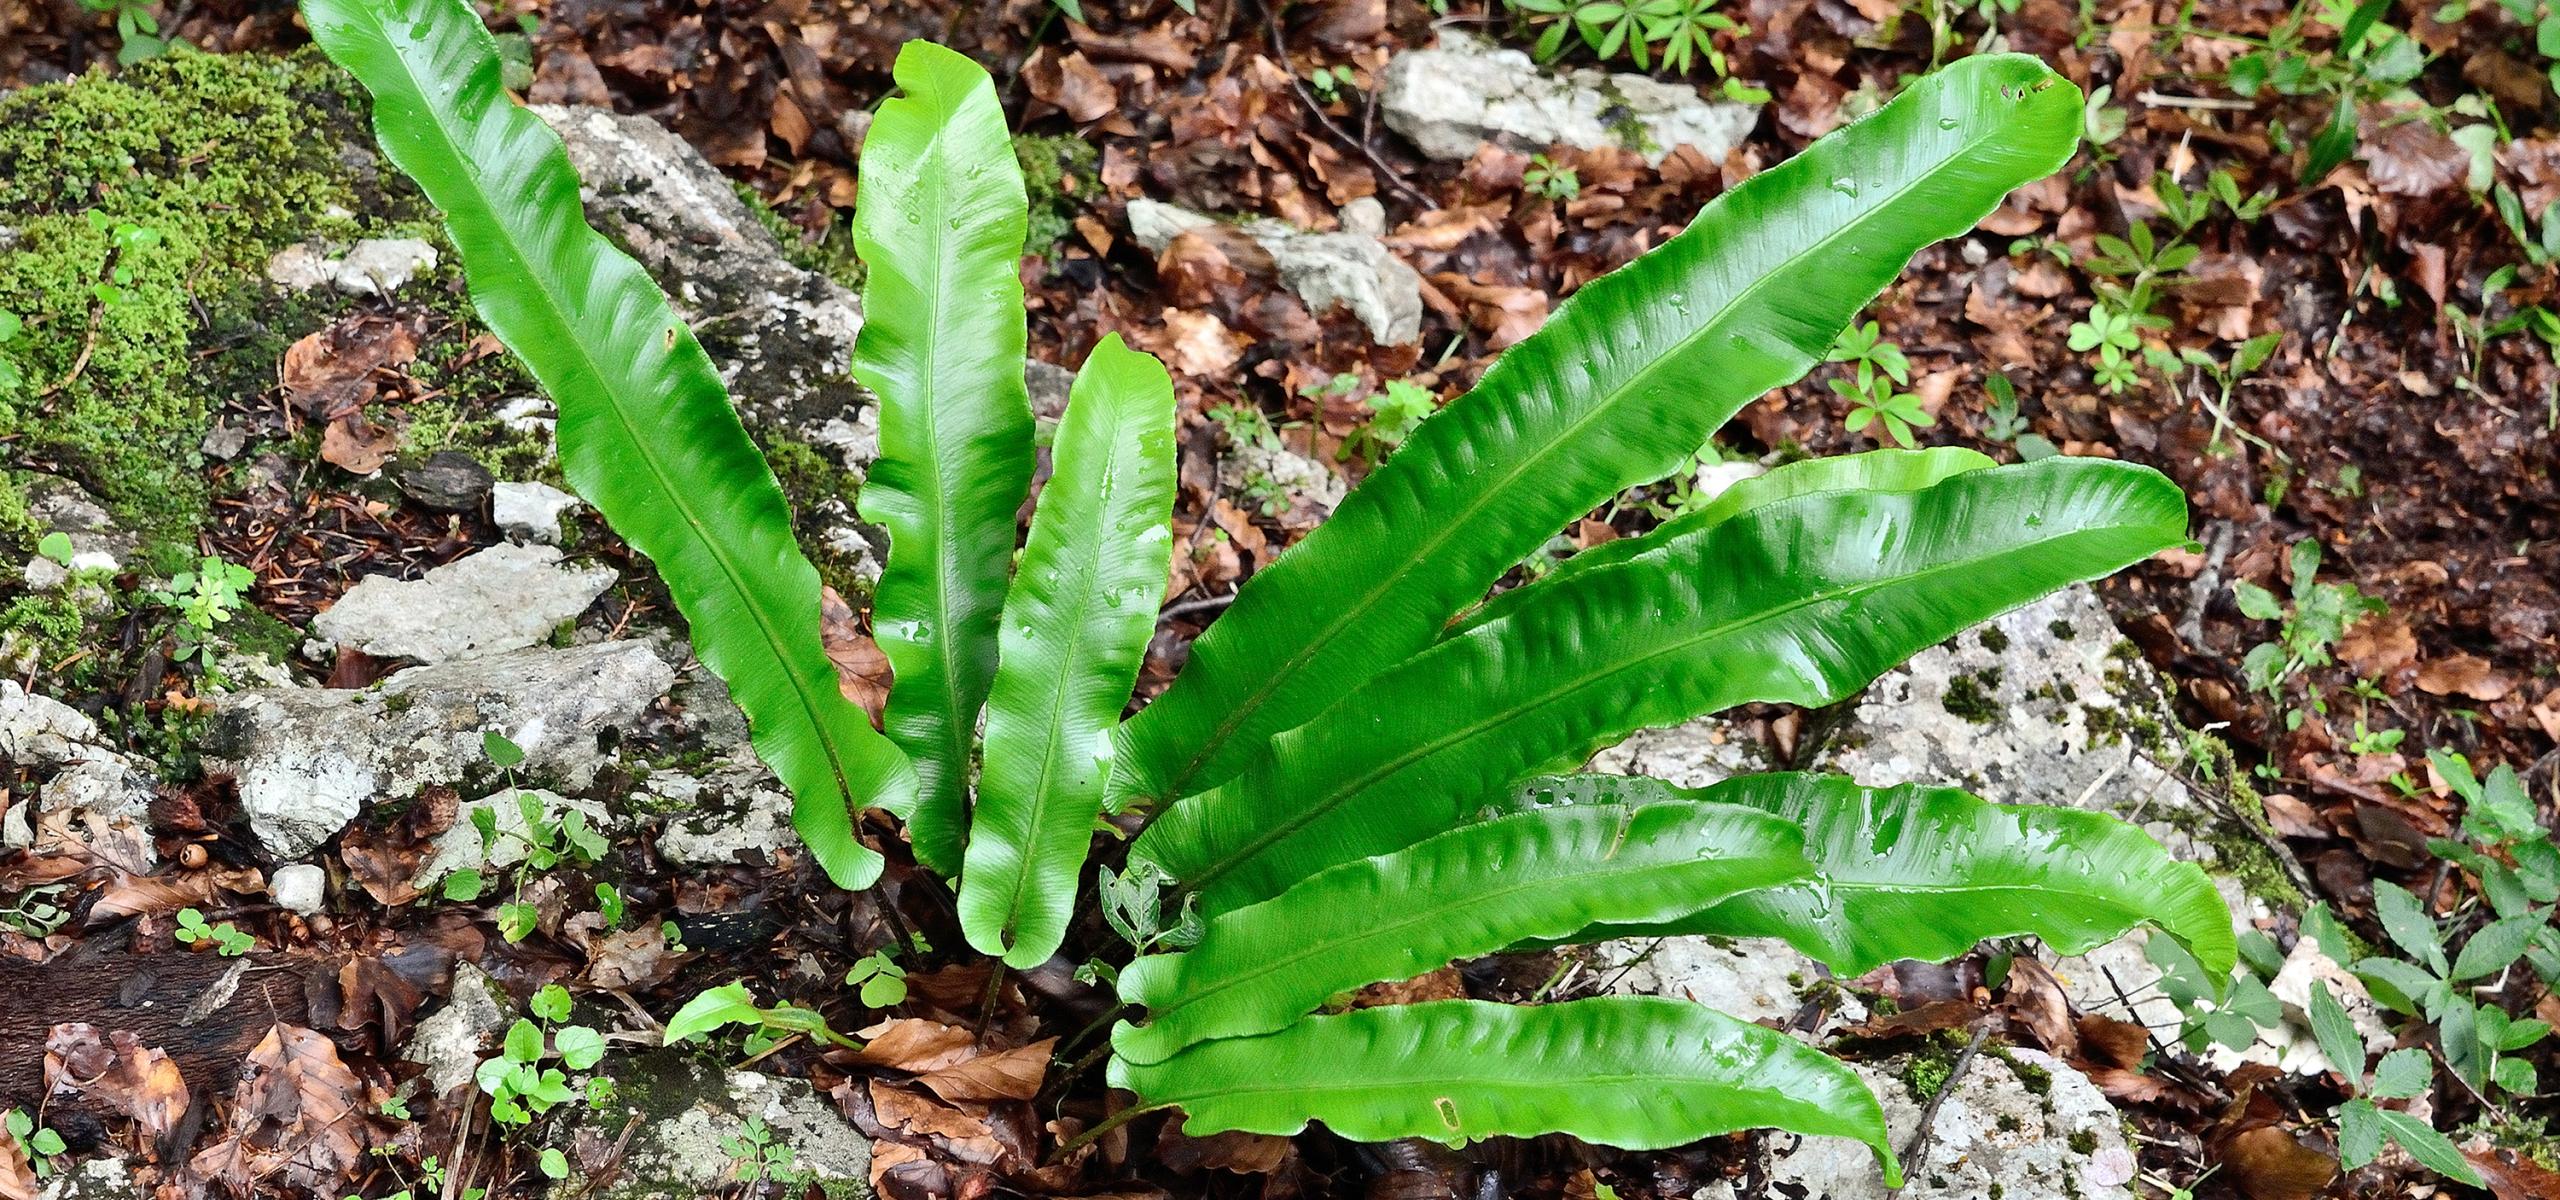 Deer's tongue fern with evergreen leaves with entire margins